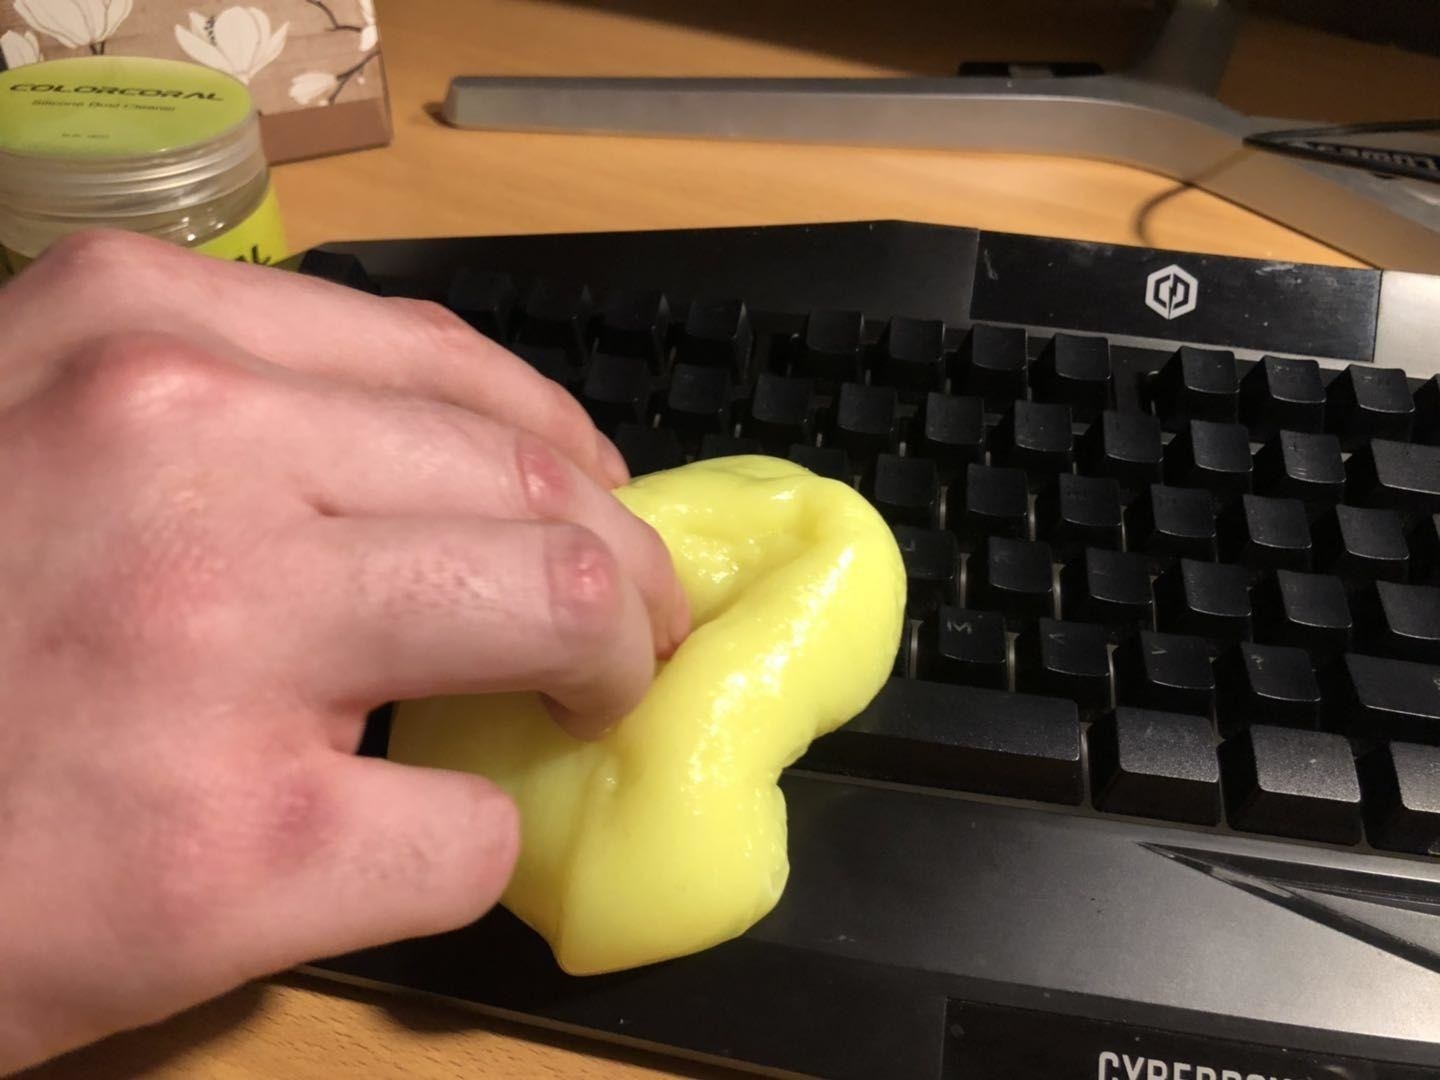 A different reviewer using the cleaning gel on their computer keyboard